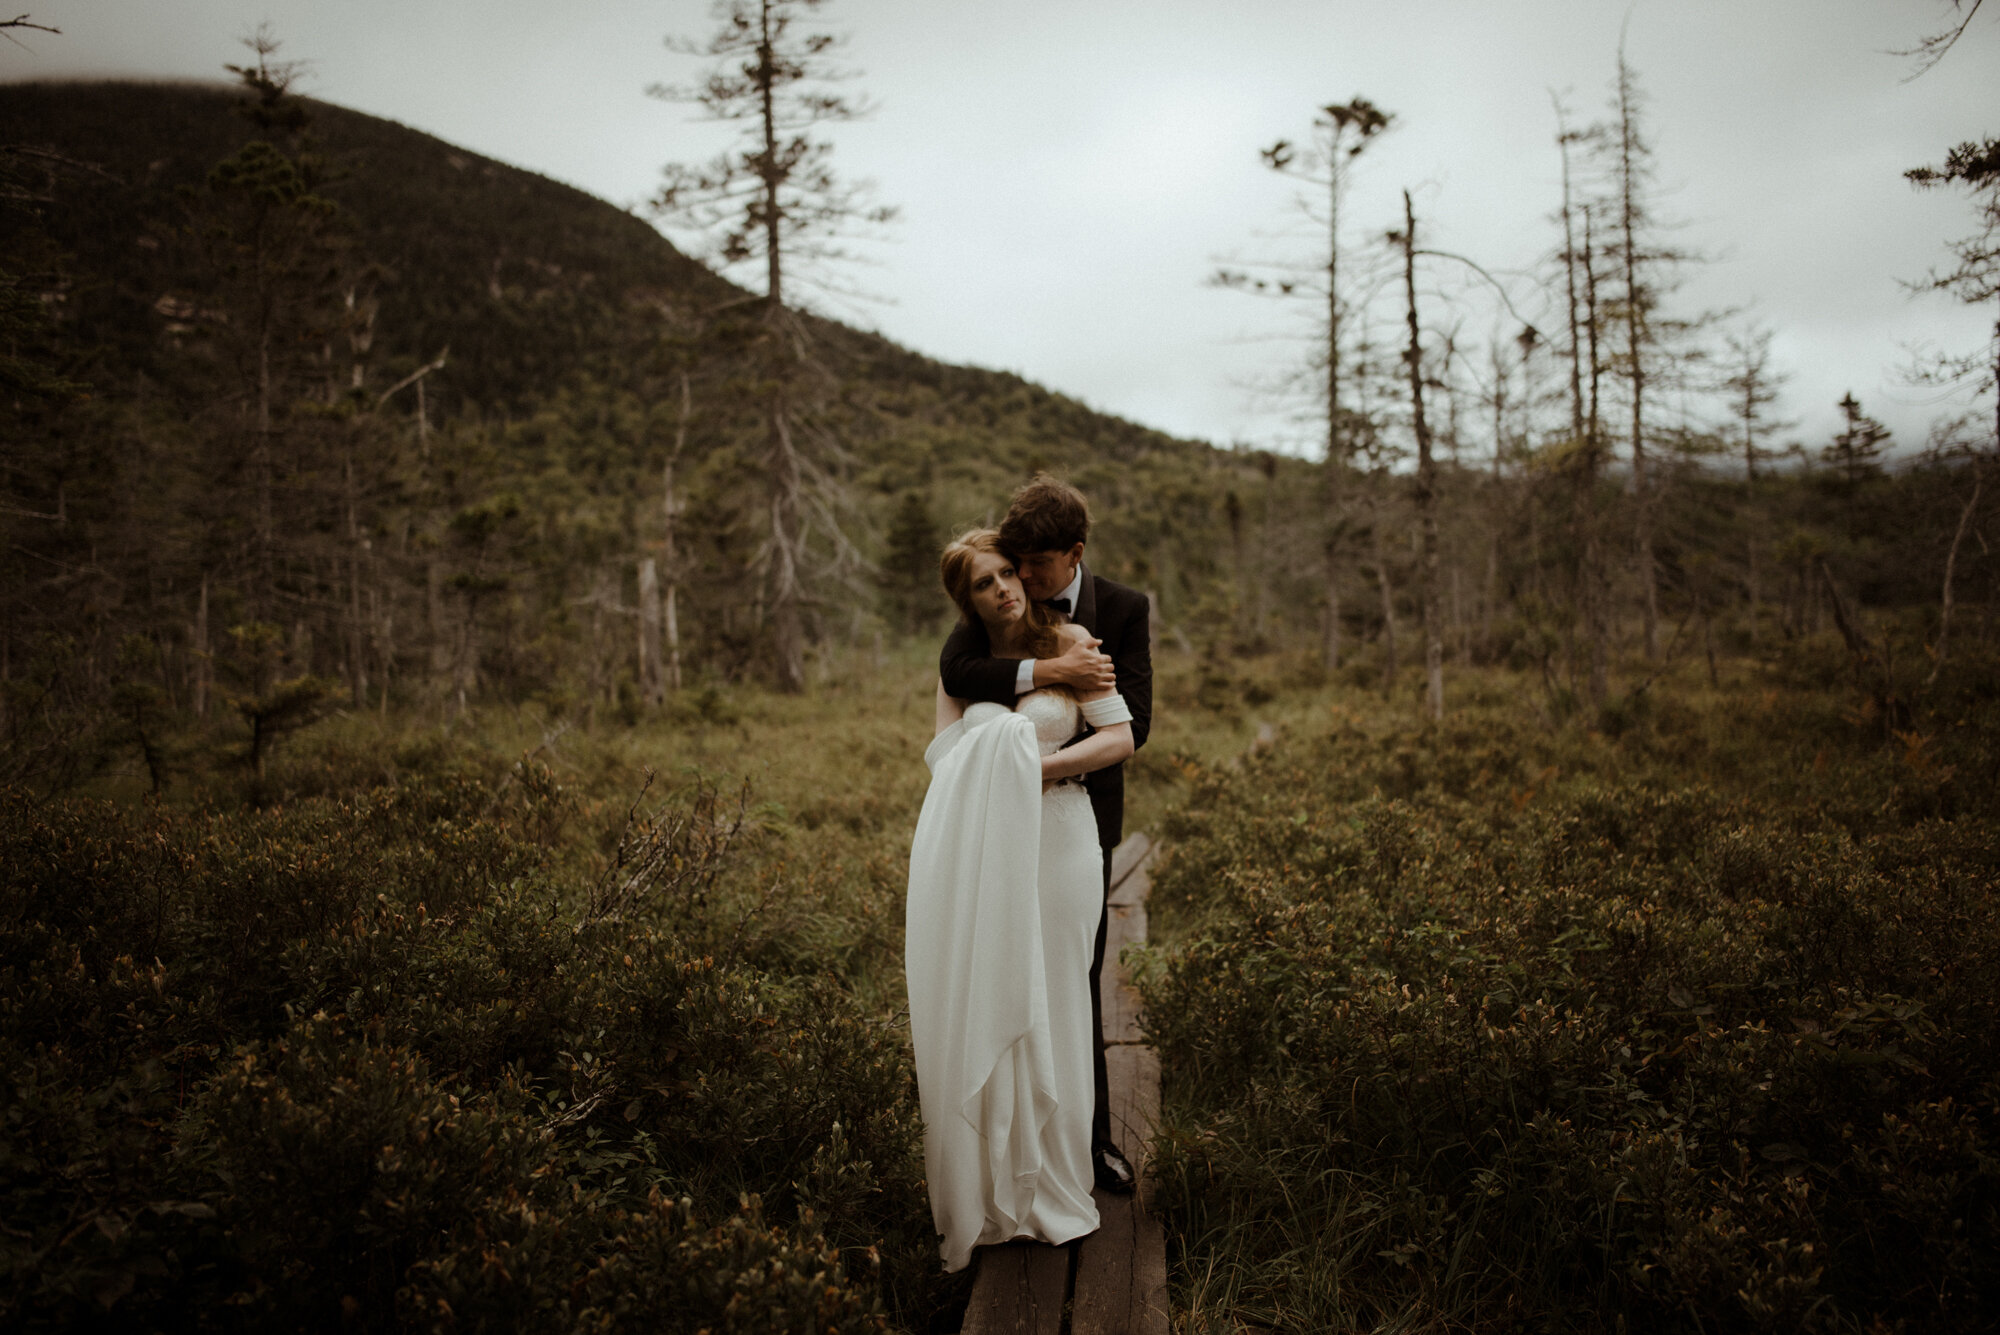 Autumn Elopement in New Hampshire - Backyard Wedding during COVID and Sunrise Hike in Wedding Dress - White Sails Creative_105.jpg